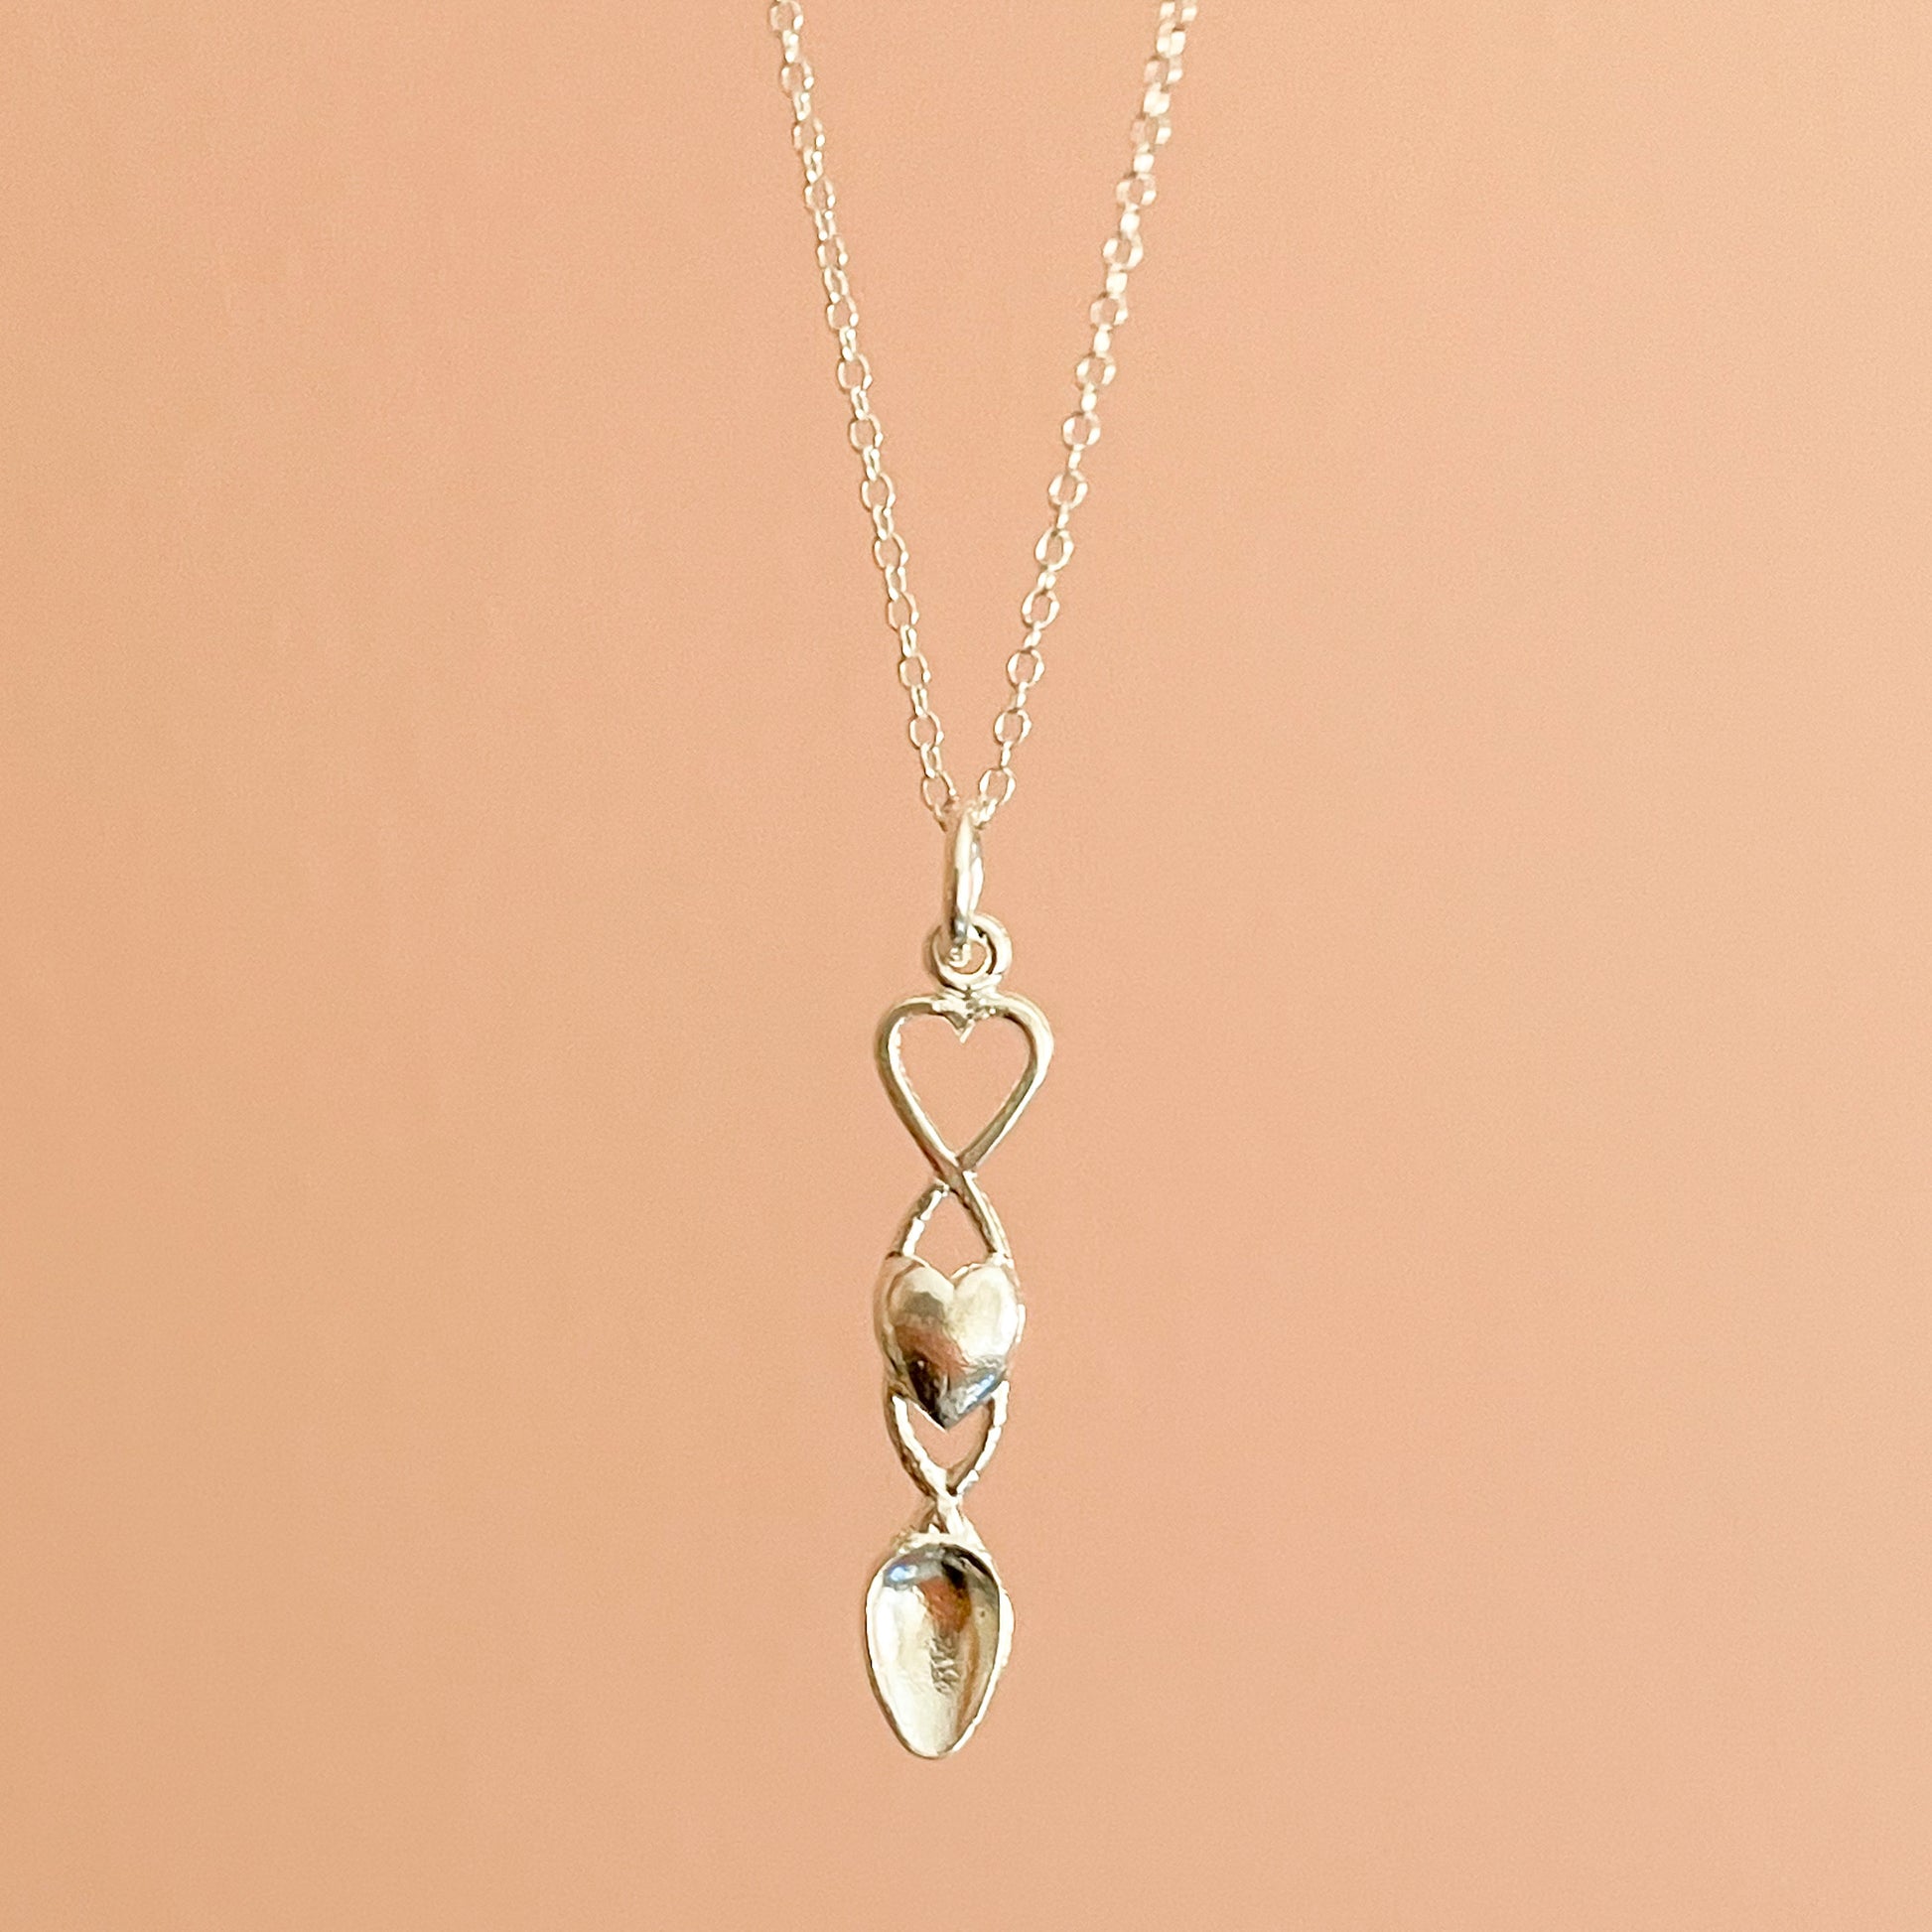 Silver tone necklace with a spoon pendant, stamped with 